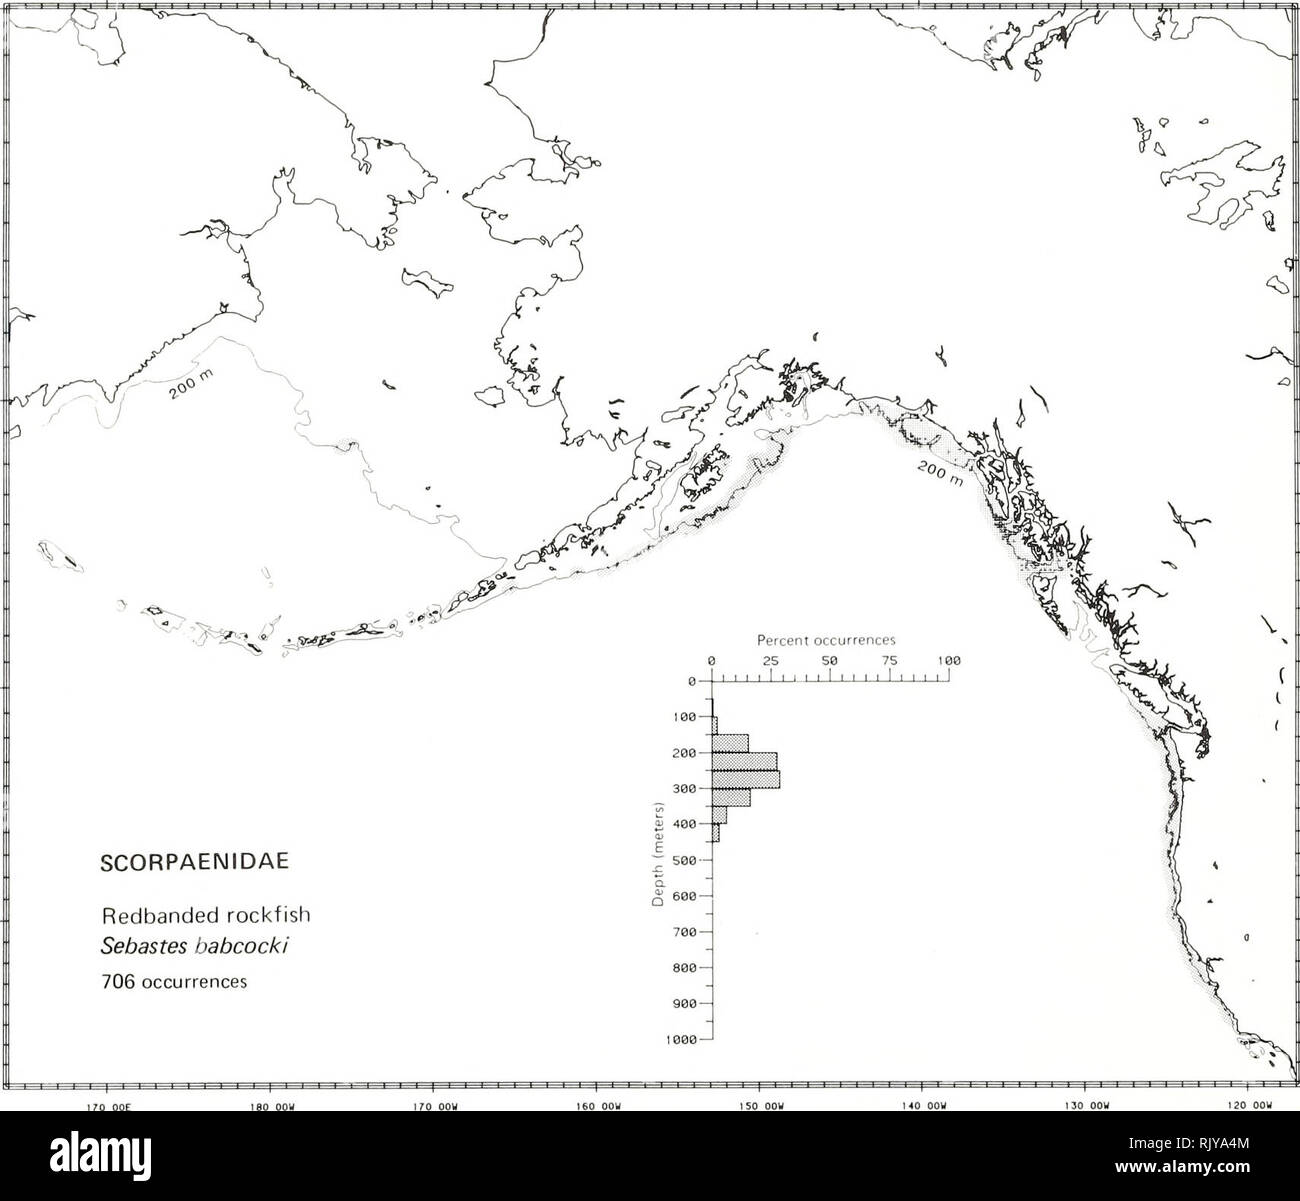 . Atlas and zoogeography of common fishes in the Bering Sea and Northeastern Pacific / M. James Allen, Gary B. Smith. Fishes Bering Sea Geographical distribution.. REDBANDED ROCKFISH, Sebastes babcocki (Thompson 1915) Scorpaenidae: Scorpionfishes Literature Reported from the Bering Sea and Amchitka Island in the Aleutian Islands to San Diego, California (Howe 1981; Eschmeyer and Herald 1983), at depths of 49 to 550 m (Fedorov 1973a). Survey data Found from northwest of Zhemchug Canyon on the central slope of the eastern Bering Sea and Tigalda Island in the Aleu- tian Islands to Morro Bay, Cali Stock Photo